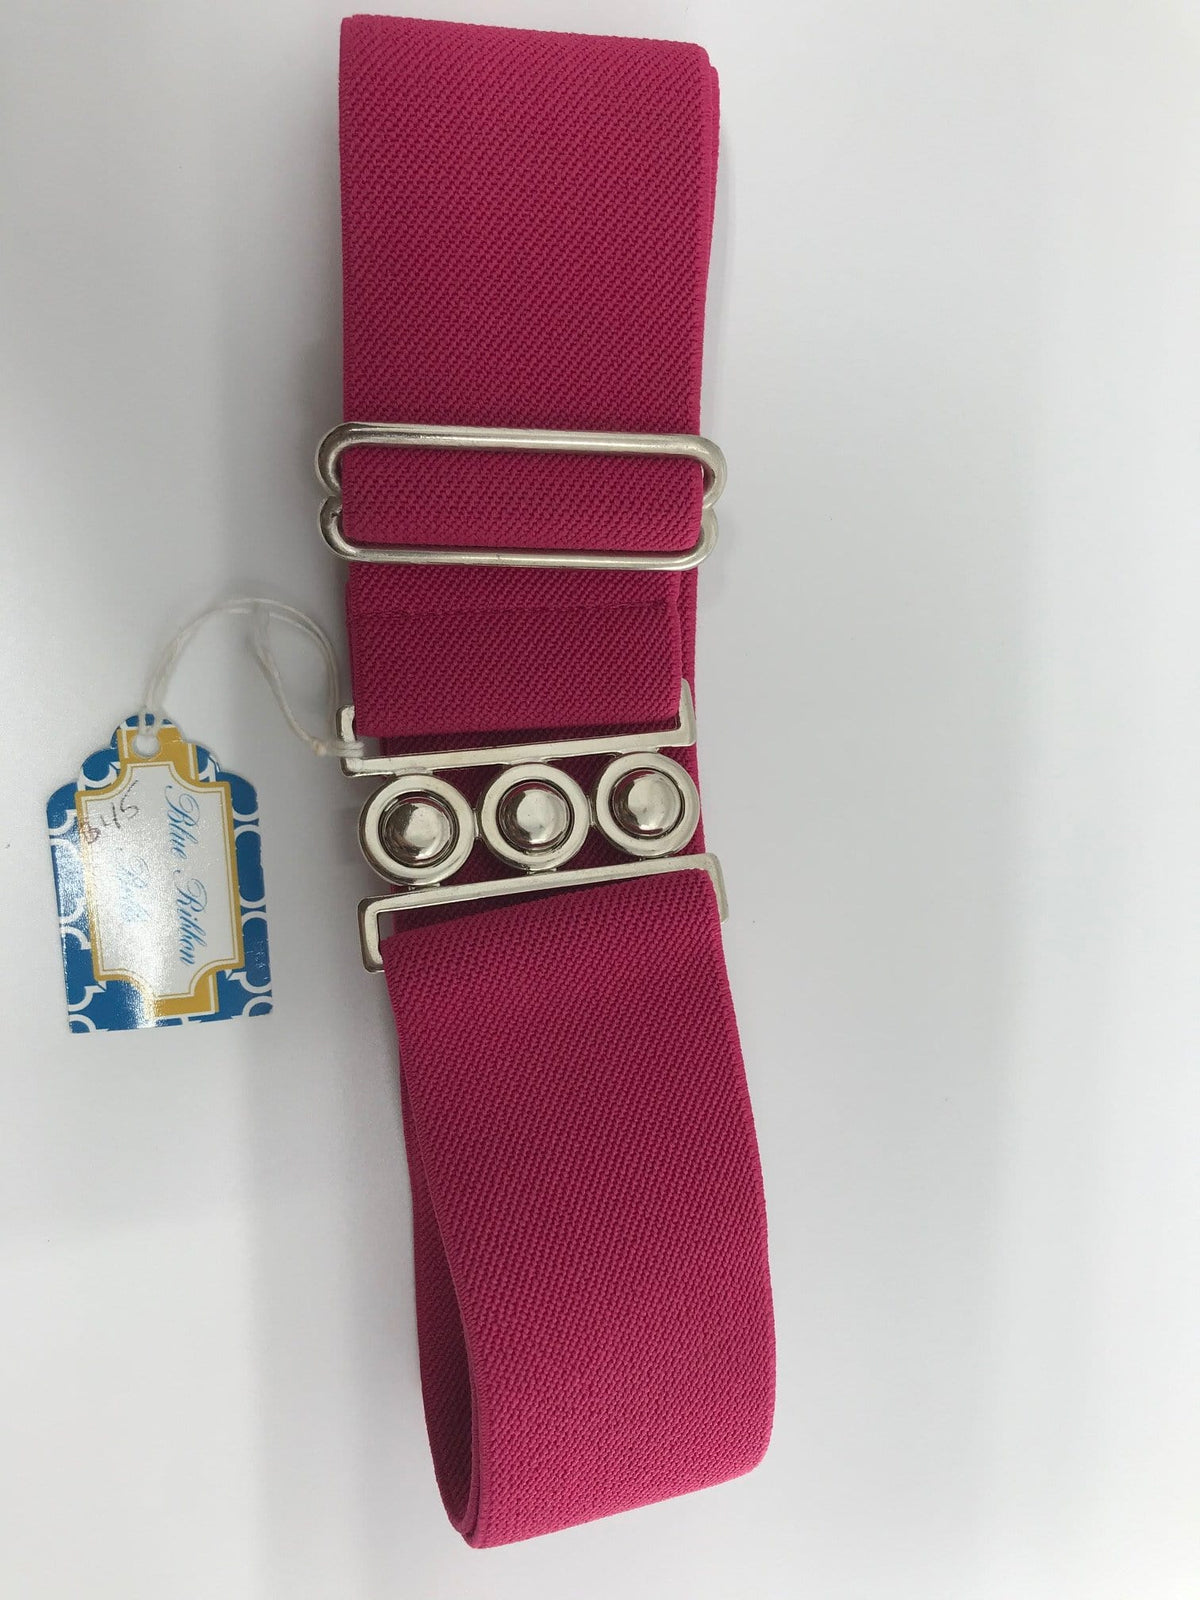 Blue Ribbon Belts Belt Pink Blue Ribbon Belts - 2 Inch equestrian team apparel online tack store mobile tack store custom farm apparel custom show stable clothing equestrian lifestyle horse show clothing riding clothes horses equestrian tack store